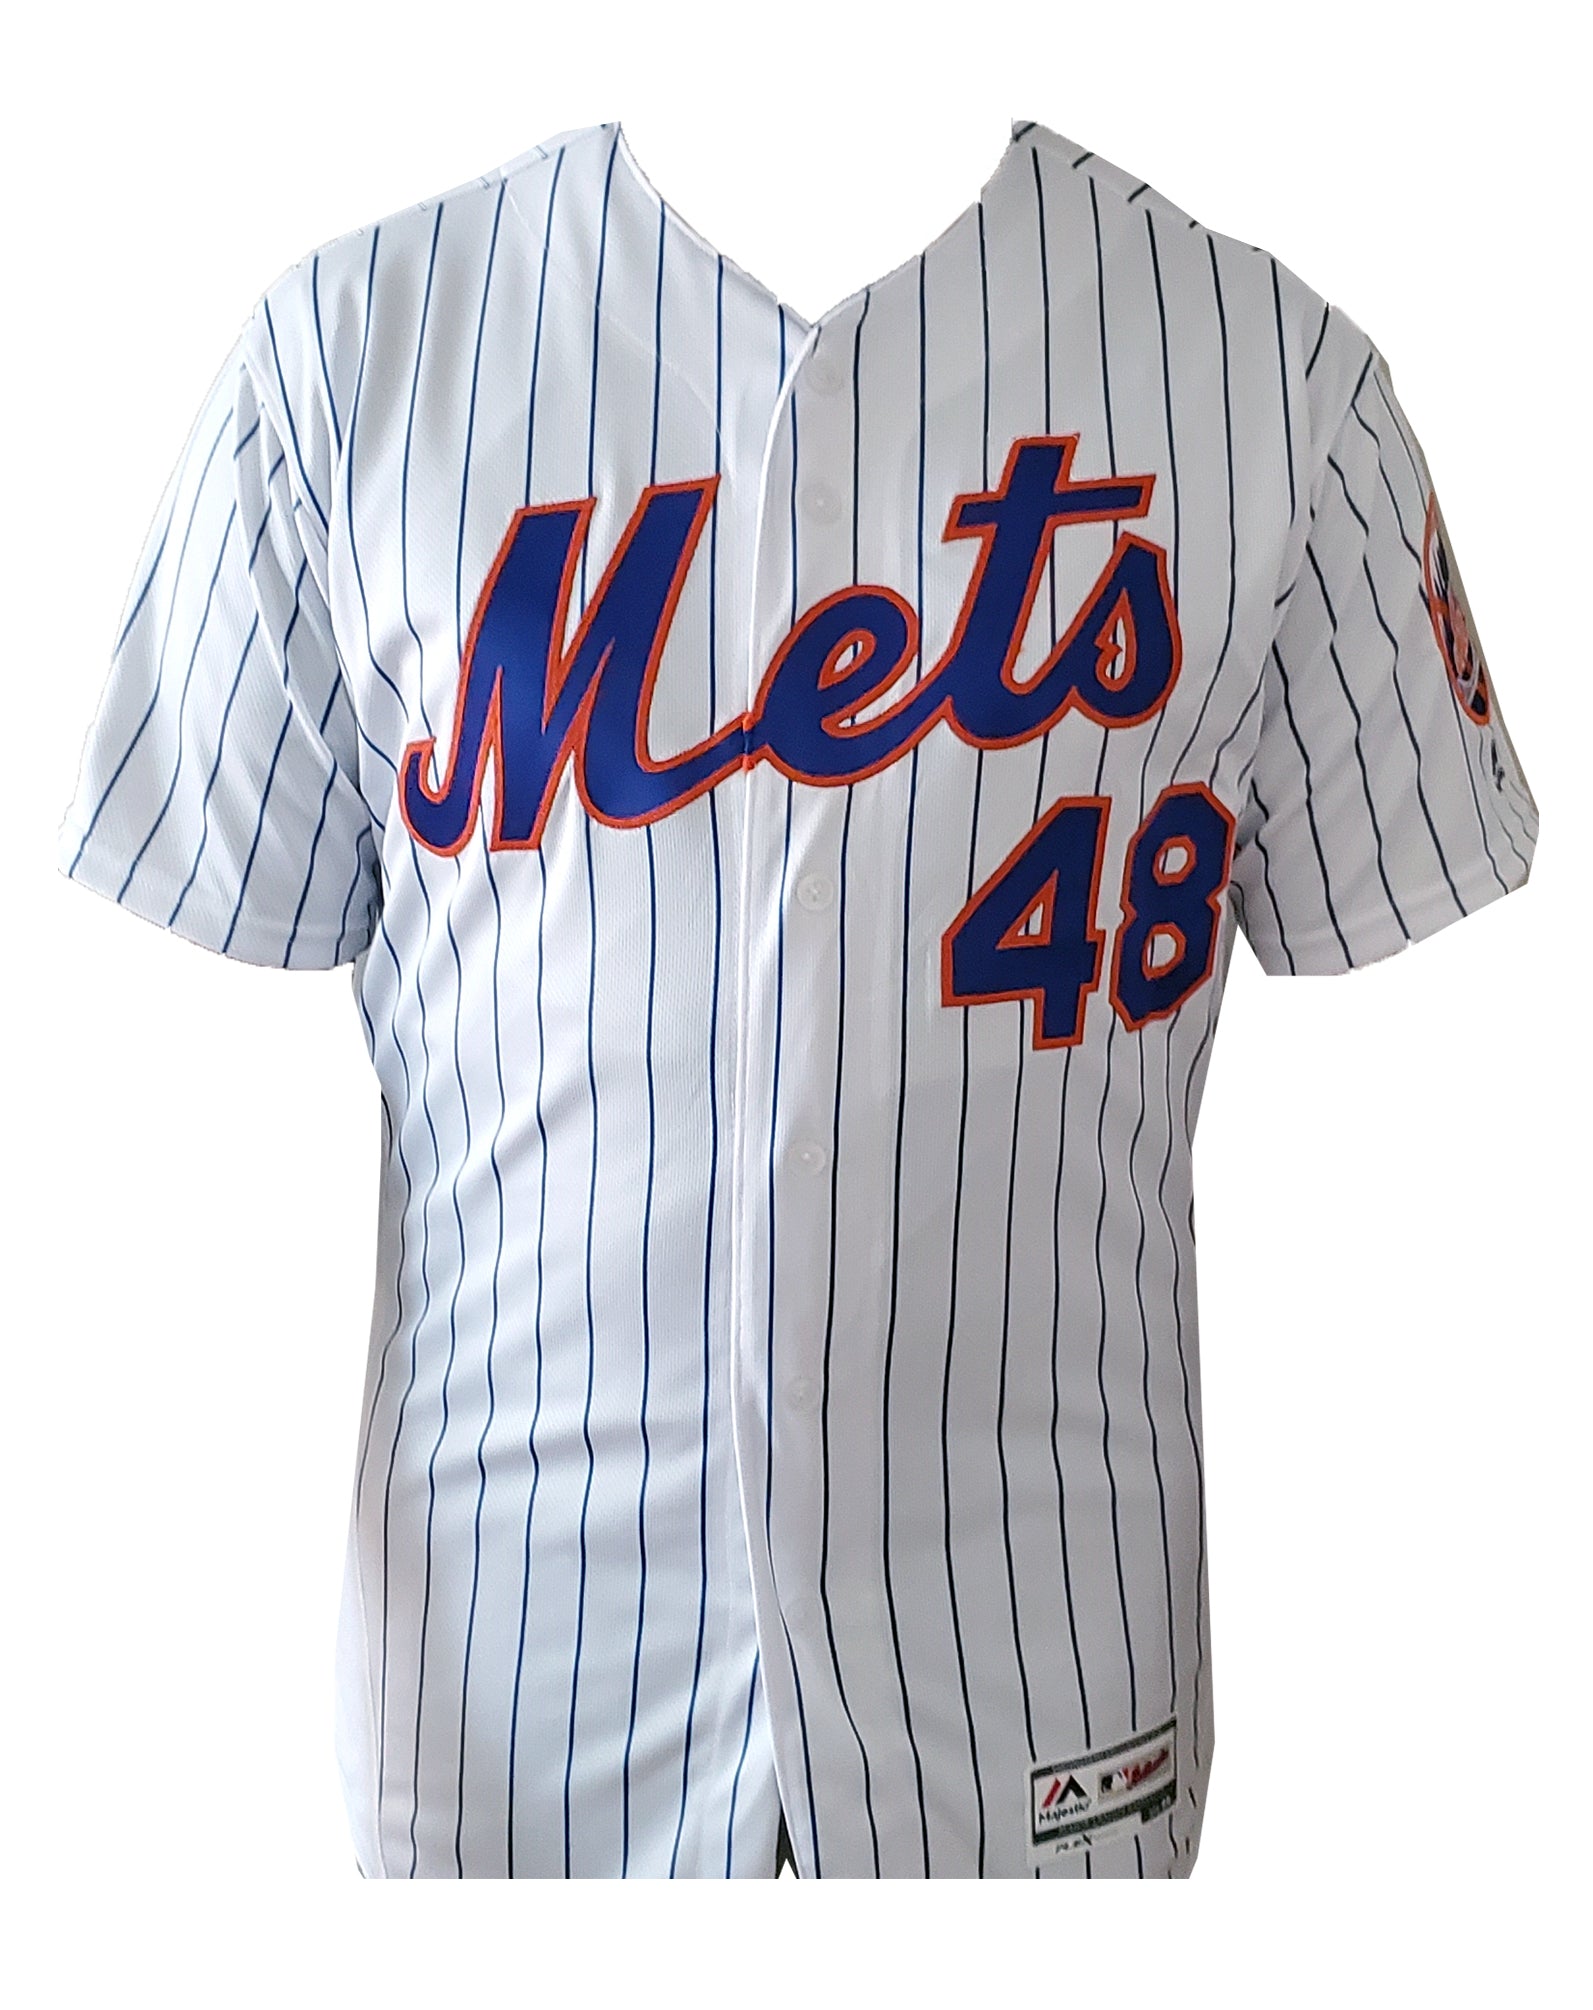 degrom authentic jersey